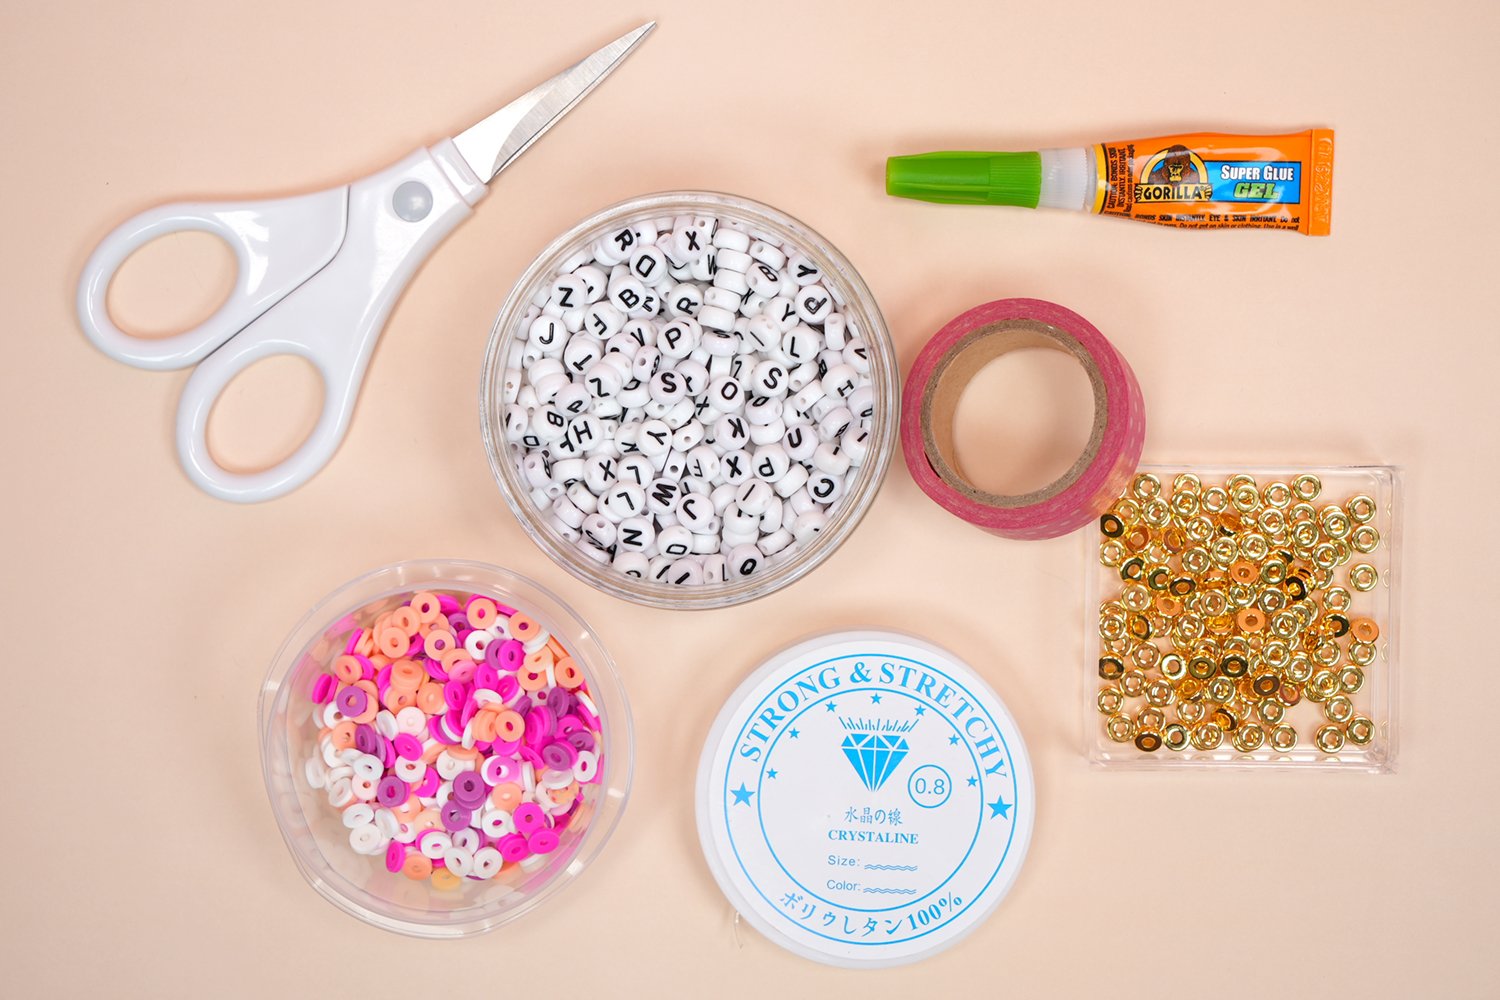 Supplies for making clay bead bracelets - clay beads, alphabet beads, spacers, string, scissors, etc. on peach background